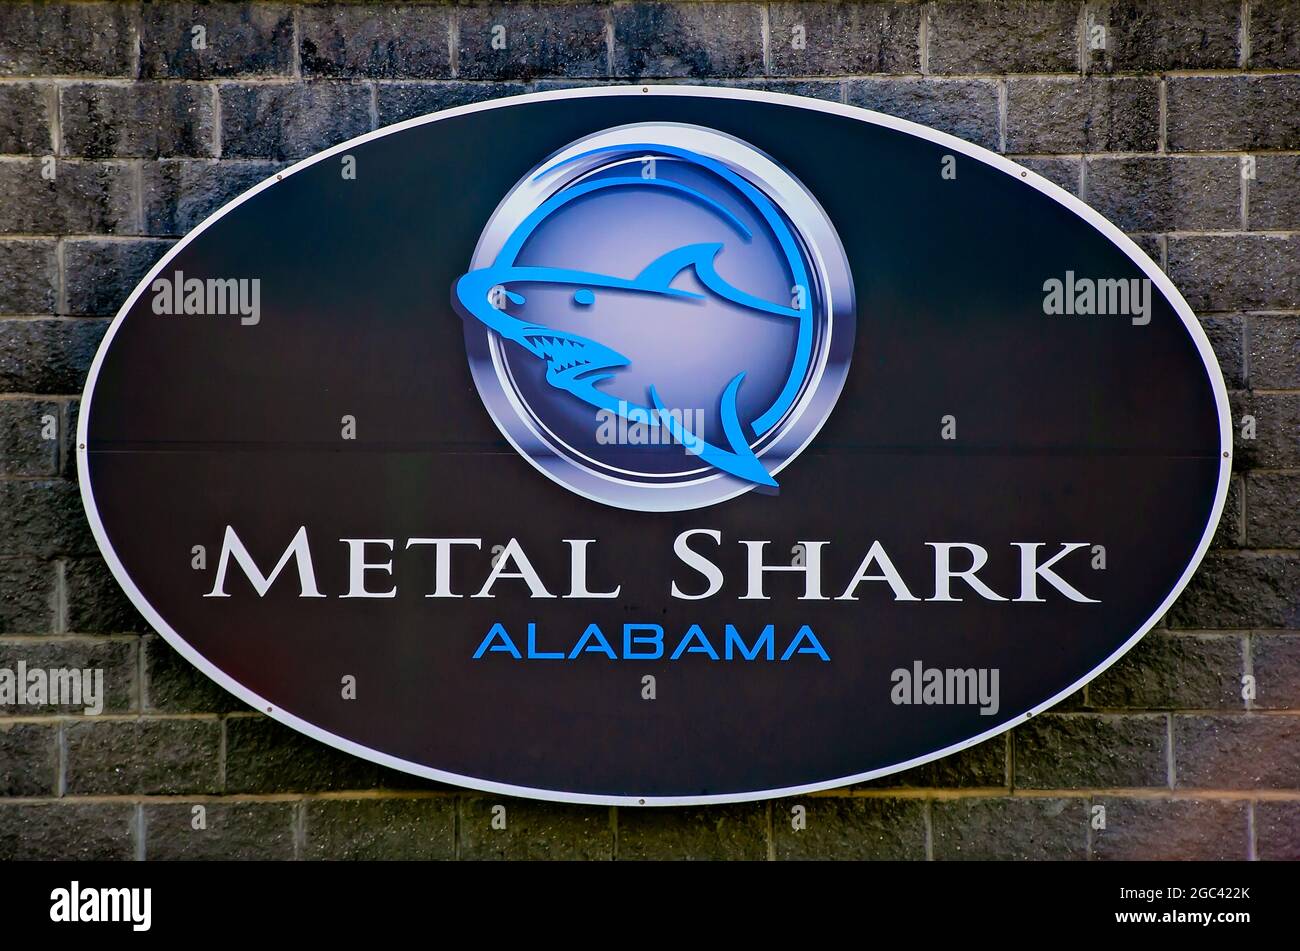 Metal Shark shipbuilding company is pictured, July 13, 2021, in Bayou La Batre, Alabama. The company specializes in the design and production of boats. Stock Photo